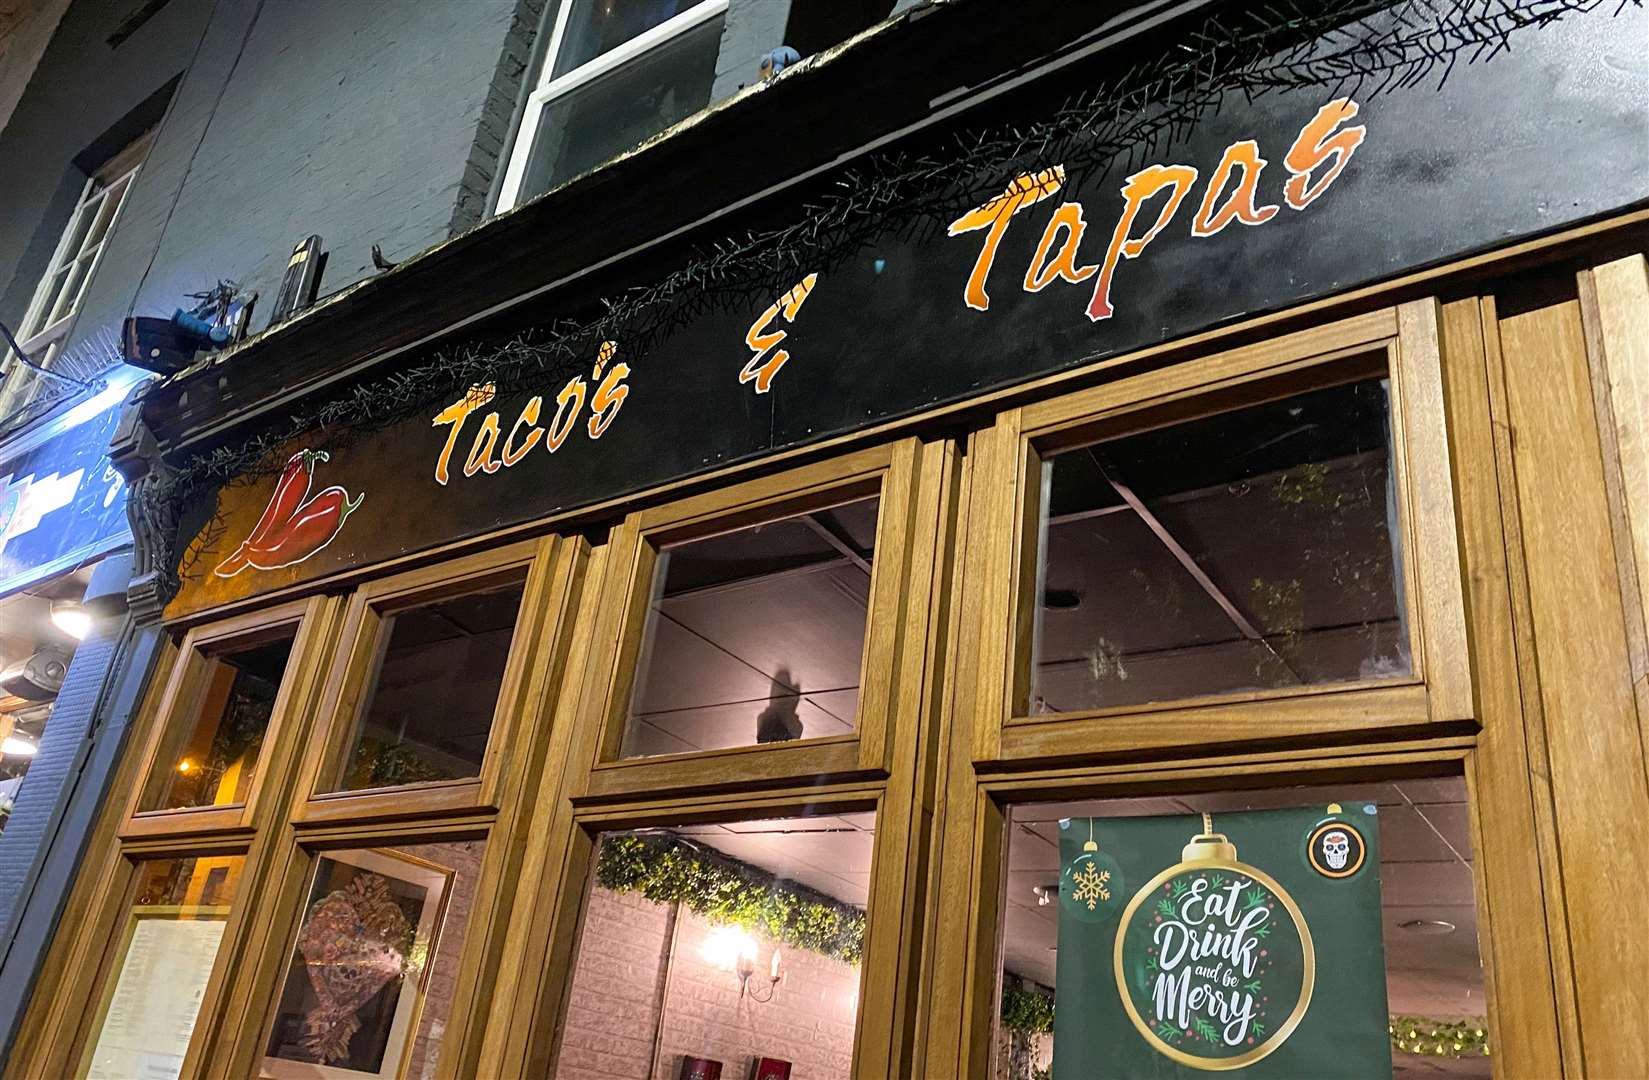 The menu offers Mexican dishes, including tacos, nachos and burritos, and a selection of Spanish tapas